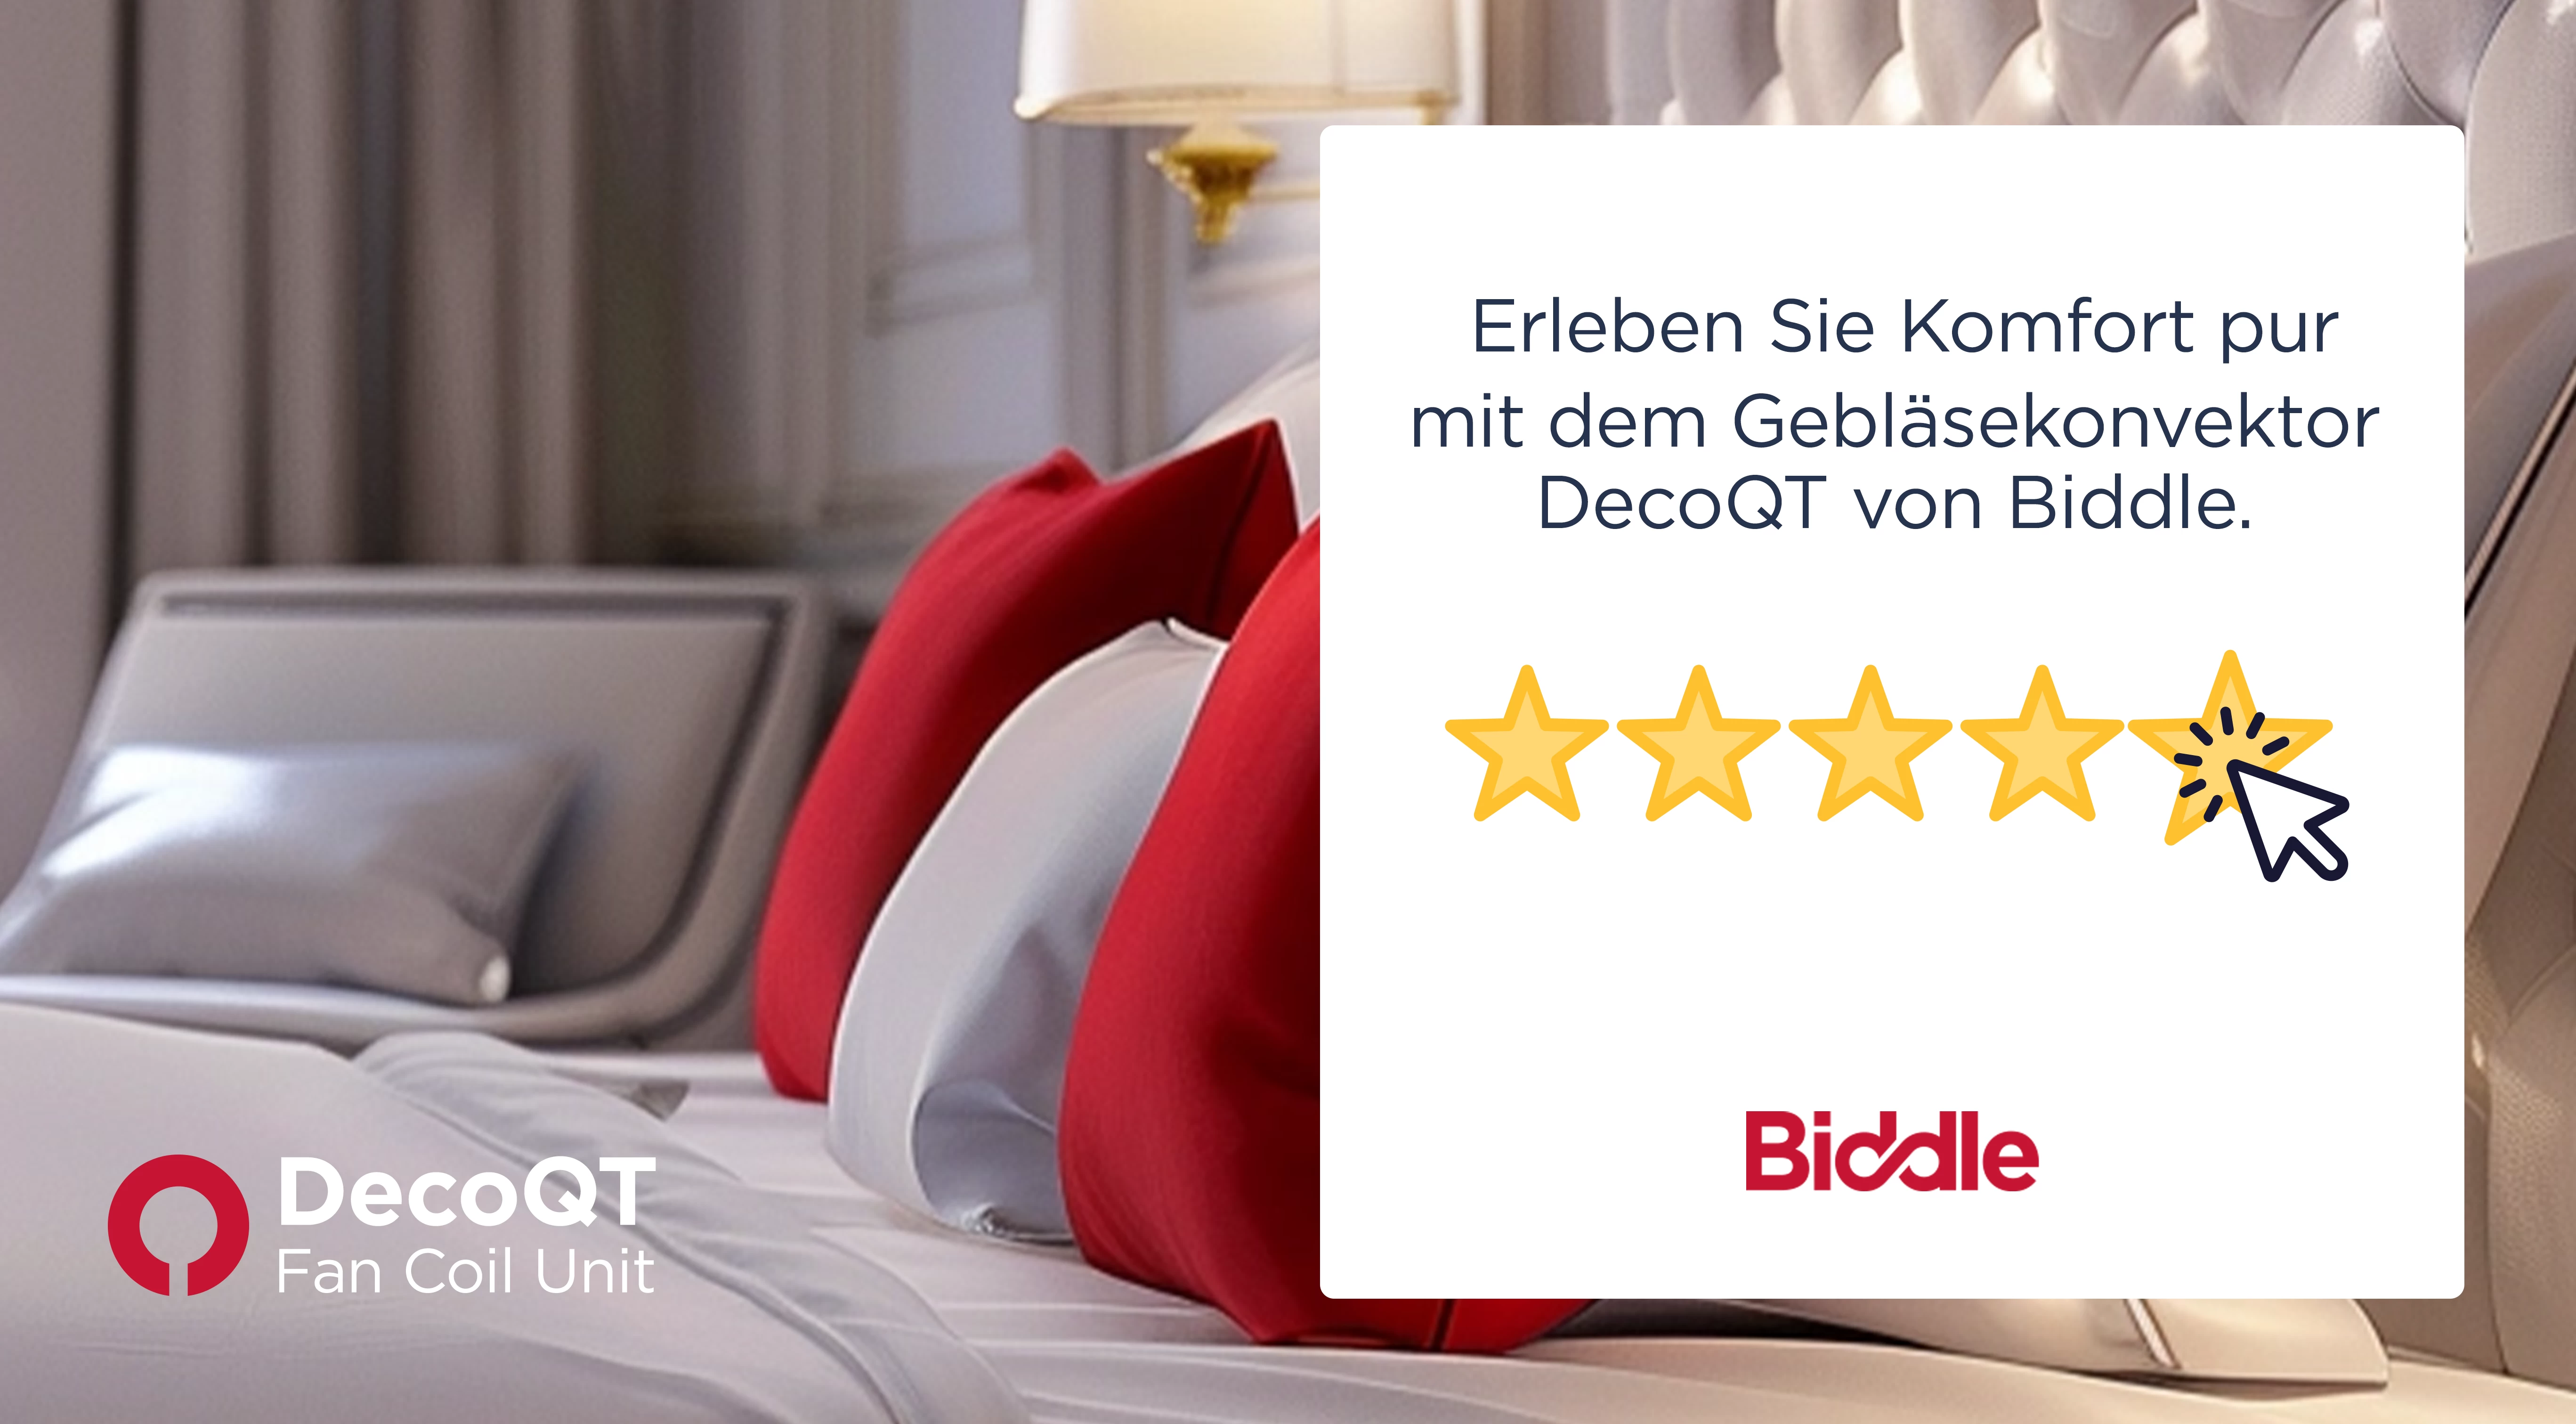 Biddle_DecoQT_Hotels_Relaunch_Creative_Marketing_Concepts_Homepage banner_Translations_DE.png